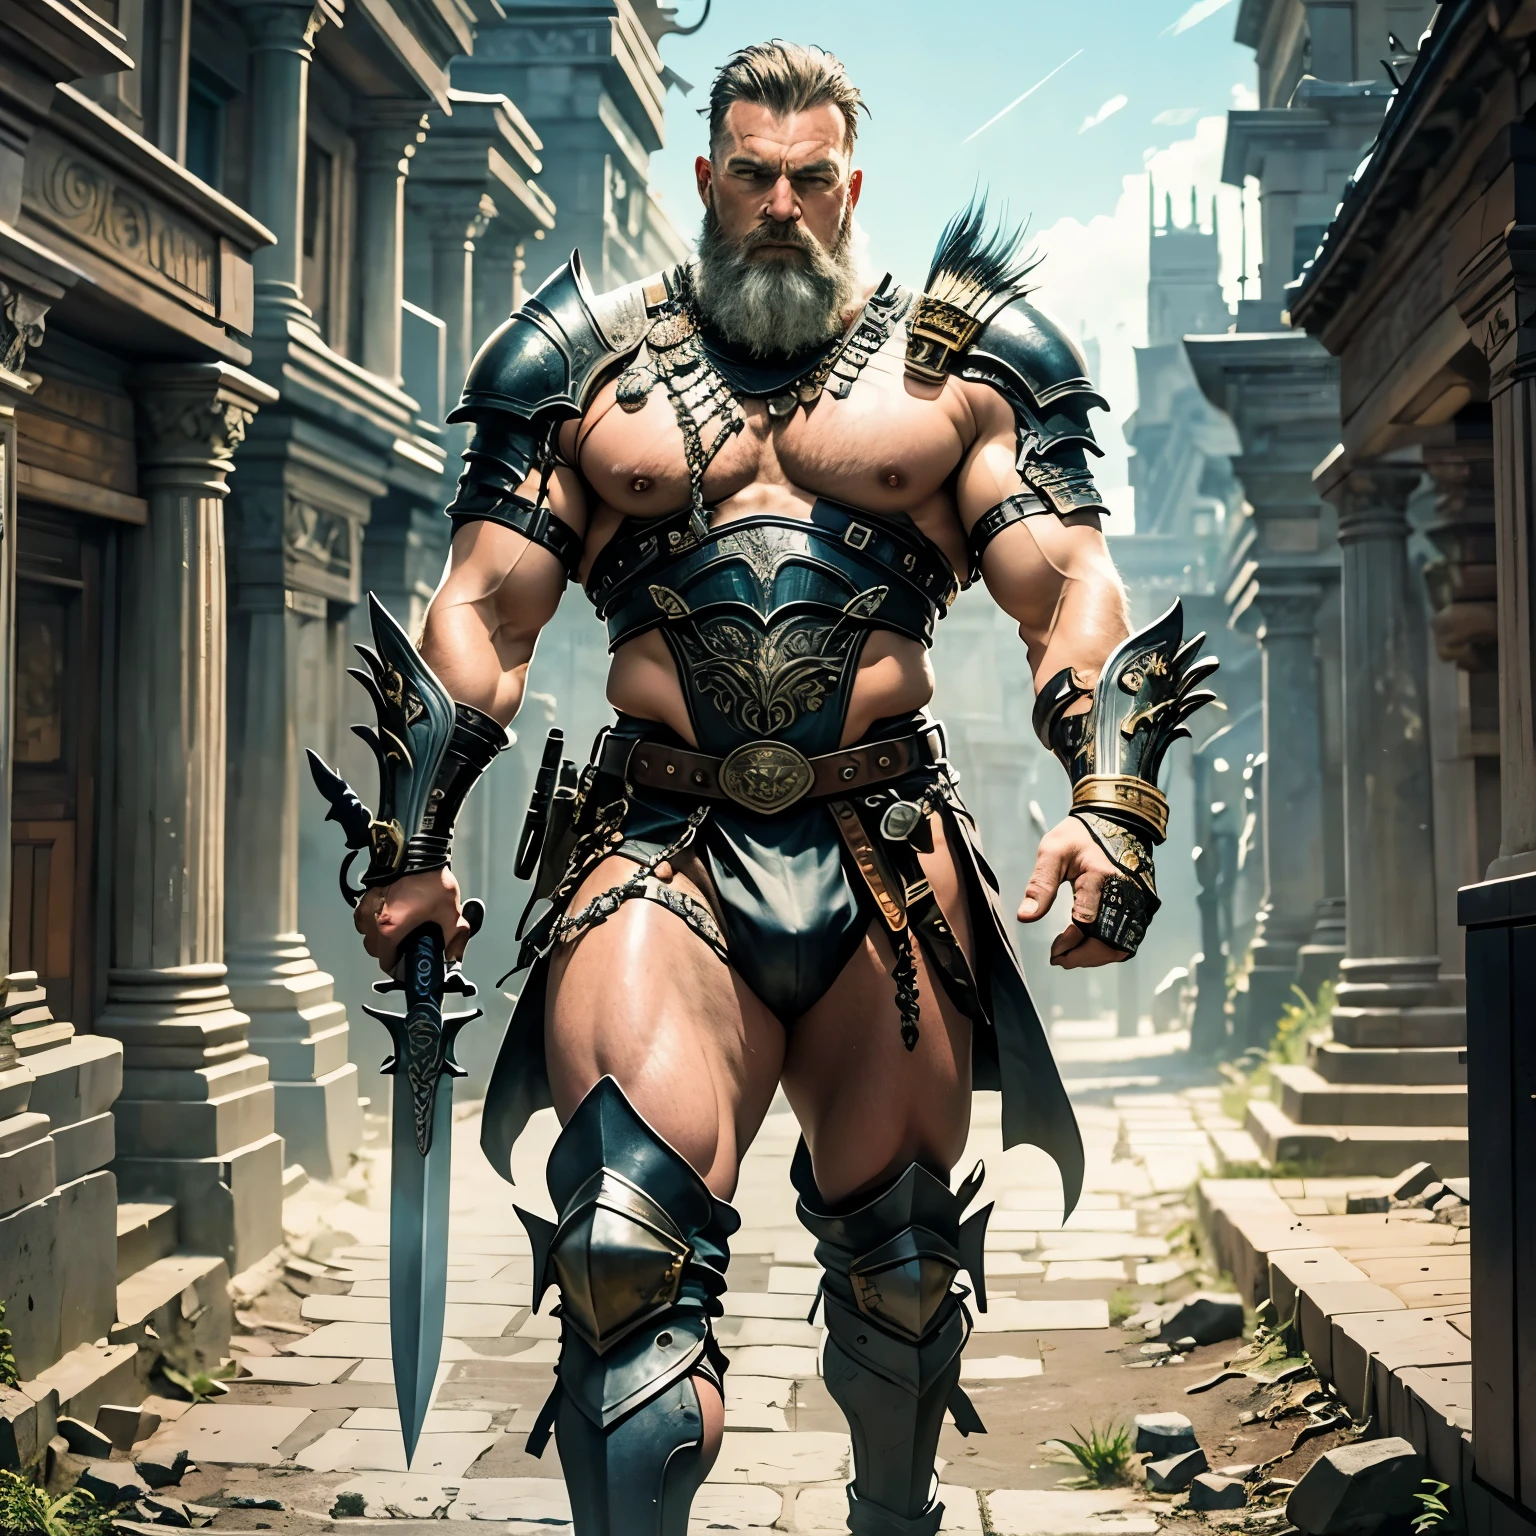 Full body face to feet image,  Physique old warrior guy wearing revealing armor, revealing armor, and holding ancient sword in his hand, angry look, perfect face details, perfect physique body details, ancient temple background, 12k, realistic photography, more details, wearing a latex thong, big bulging crotch, crotch in focus, almost naked, bodybuilder, face looks like Howie Long, full body visible, 